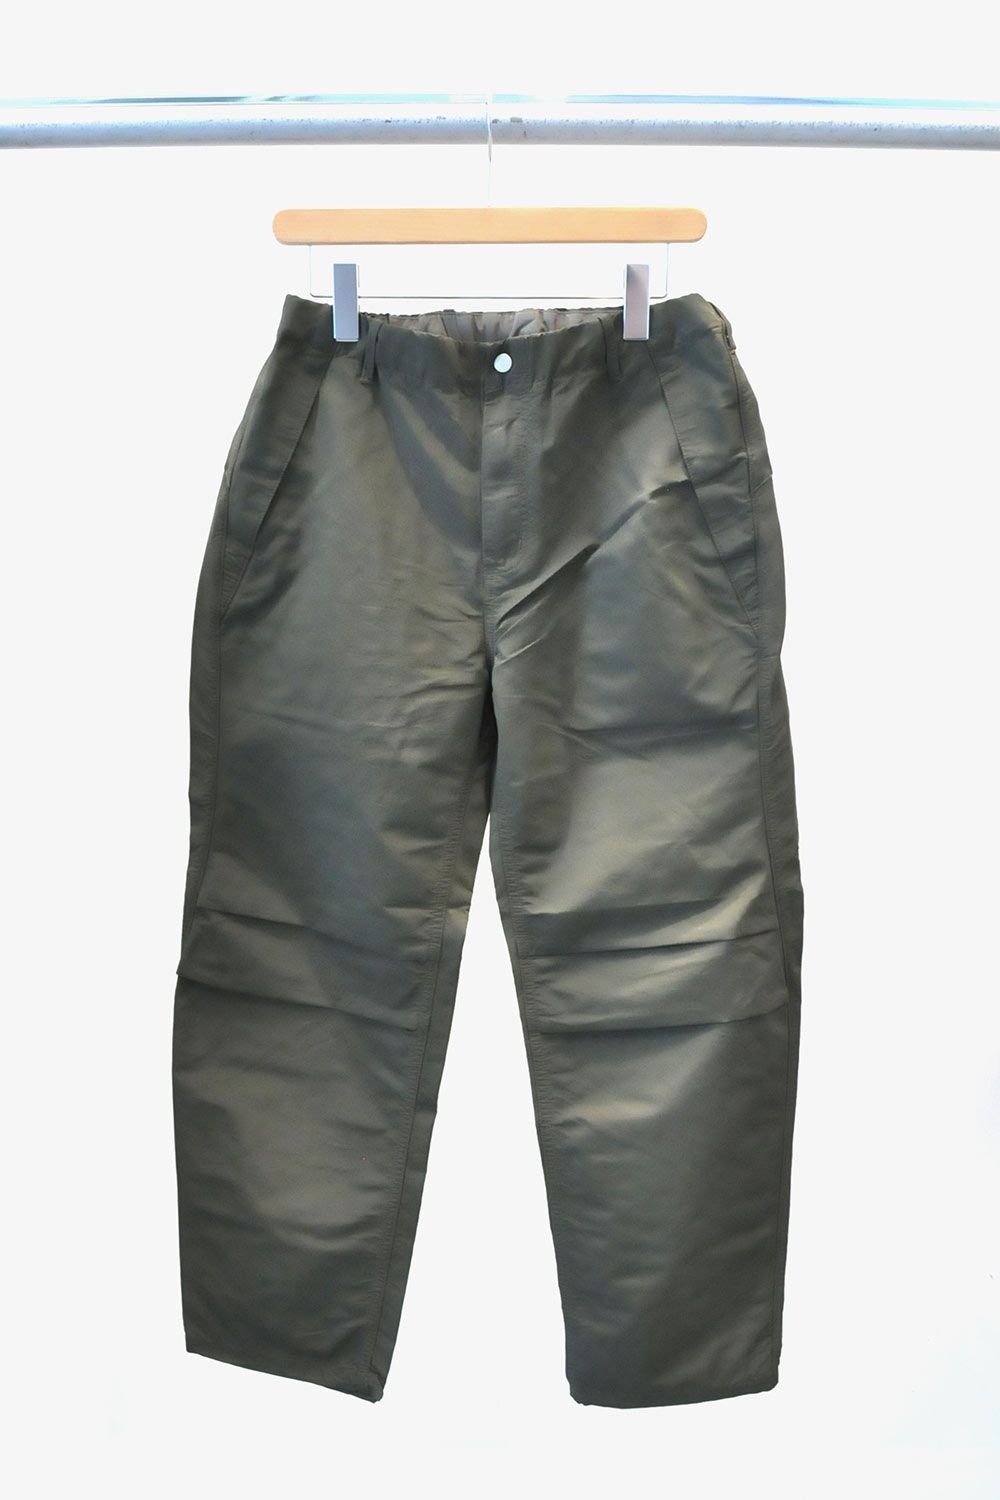 PLOUGHMAN PANTS RELAXED FIT C/N 60/40 CLOTH CORDURA® / OLIVE - 1